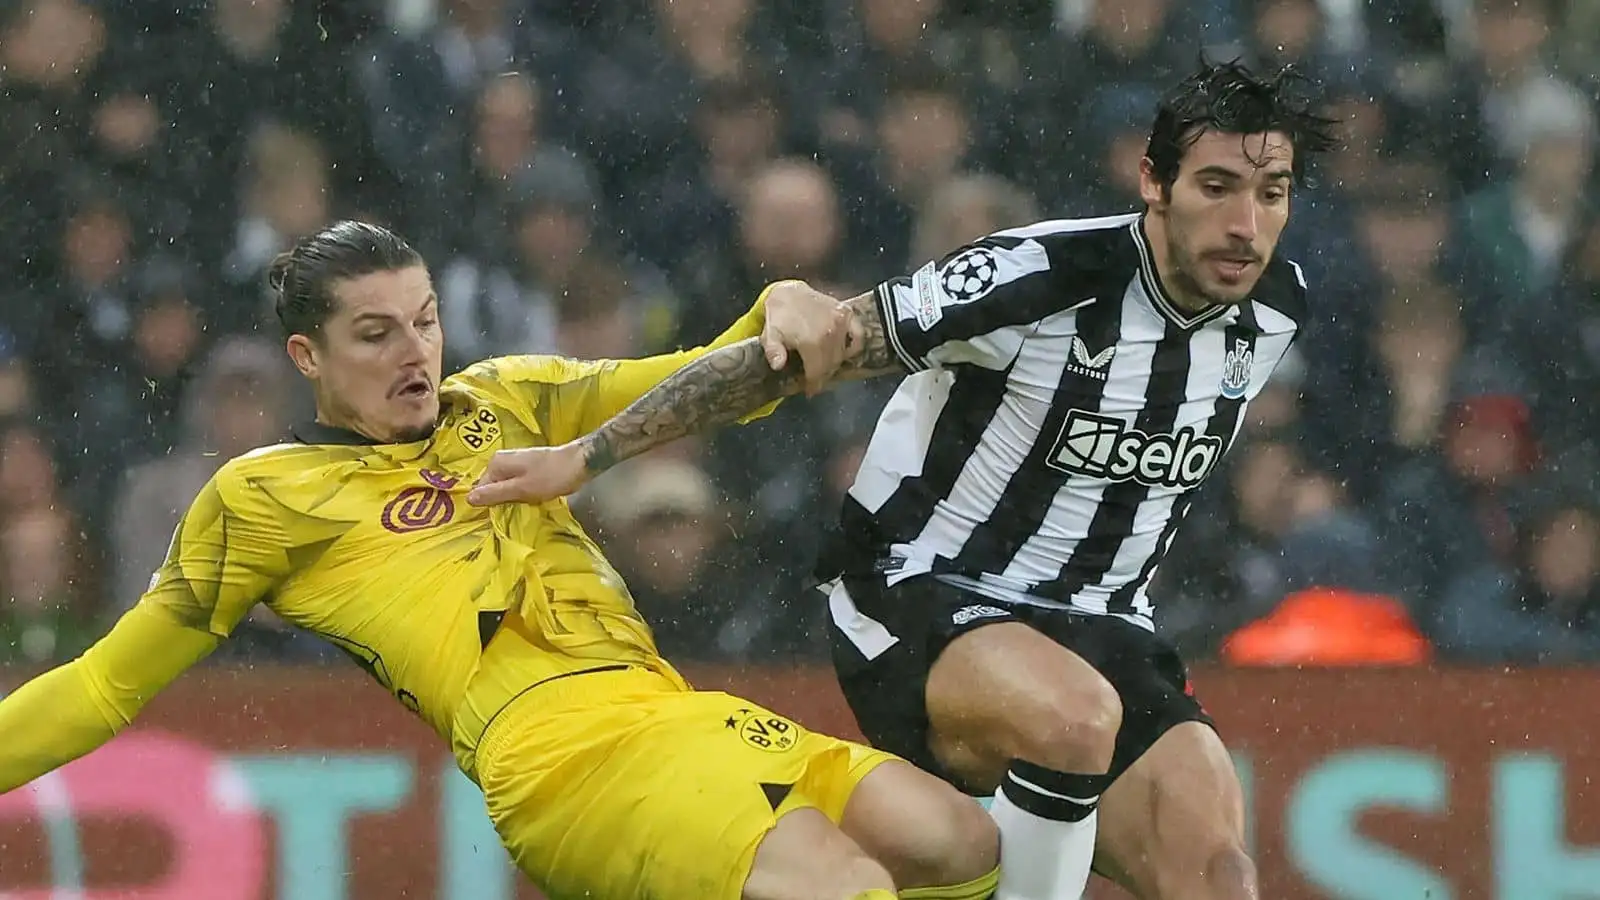 Sandro Tonali of Newcastle United in action with Marcel Sabitzer of Borussia Dortmund during the UEFA Champions League match at St. James' Park, Newcastle Upon Tyne